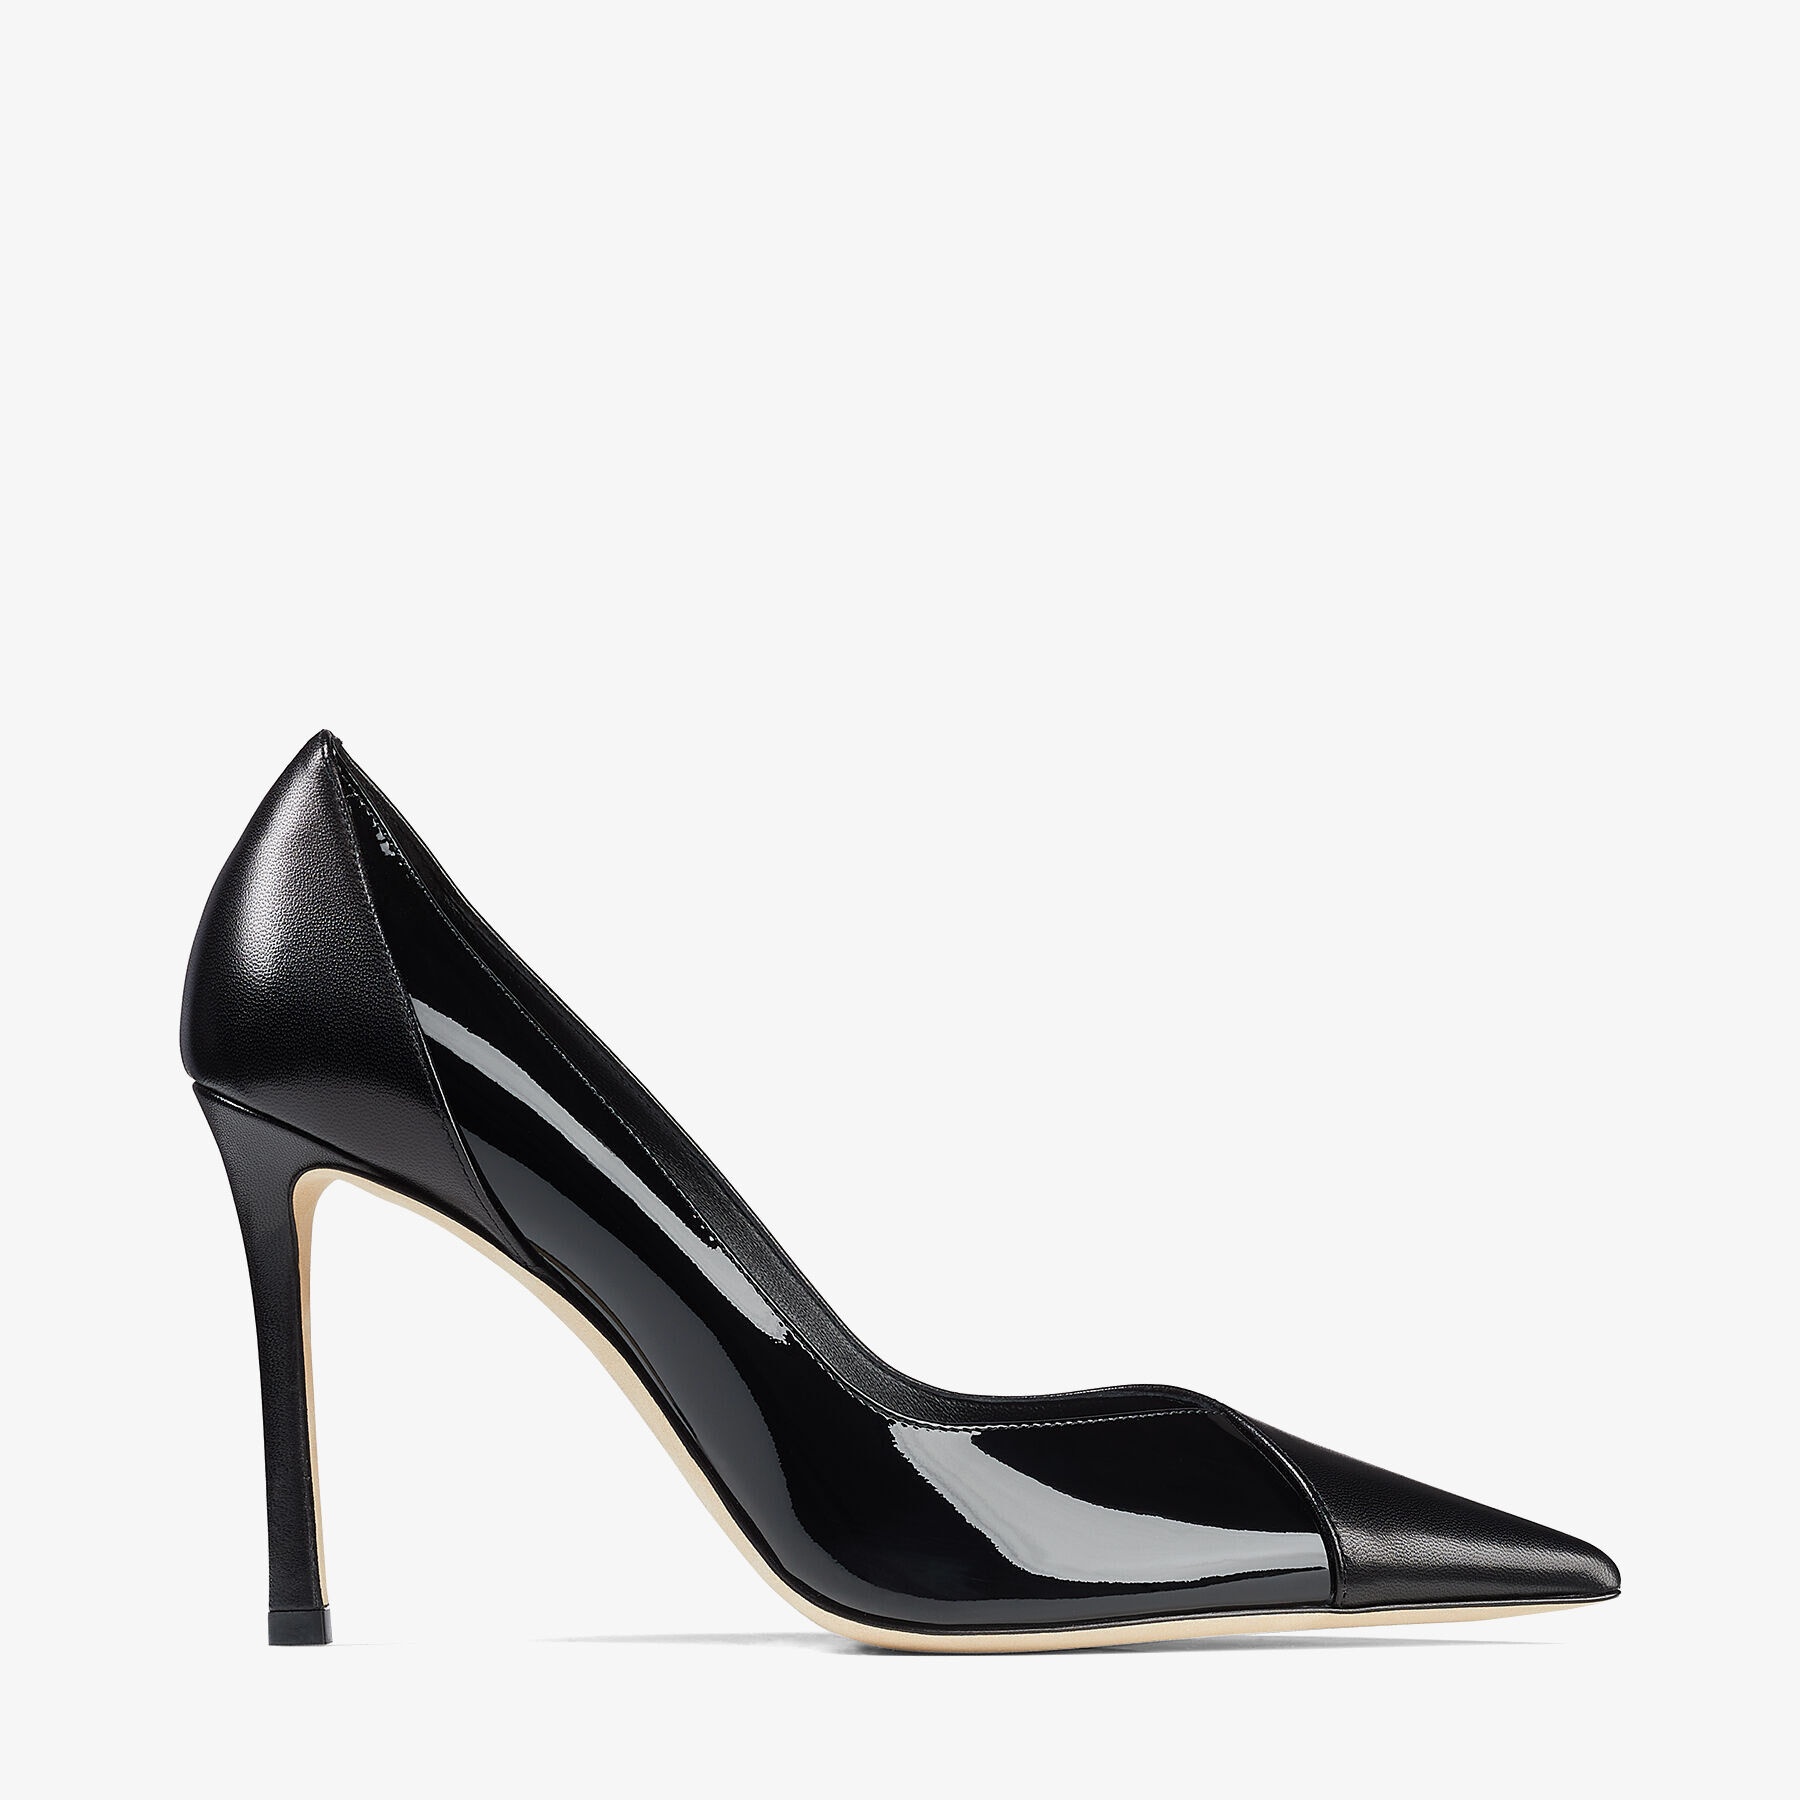 Cass 95
Black Nappa and Patent Leather Pumps - 1